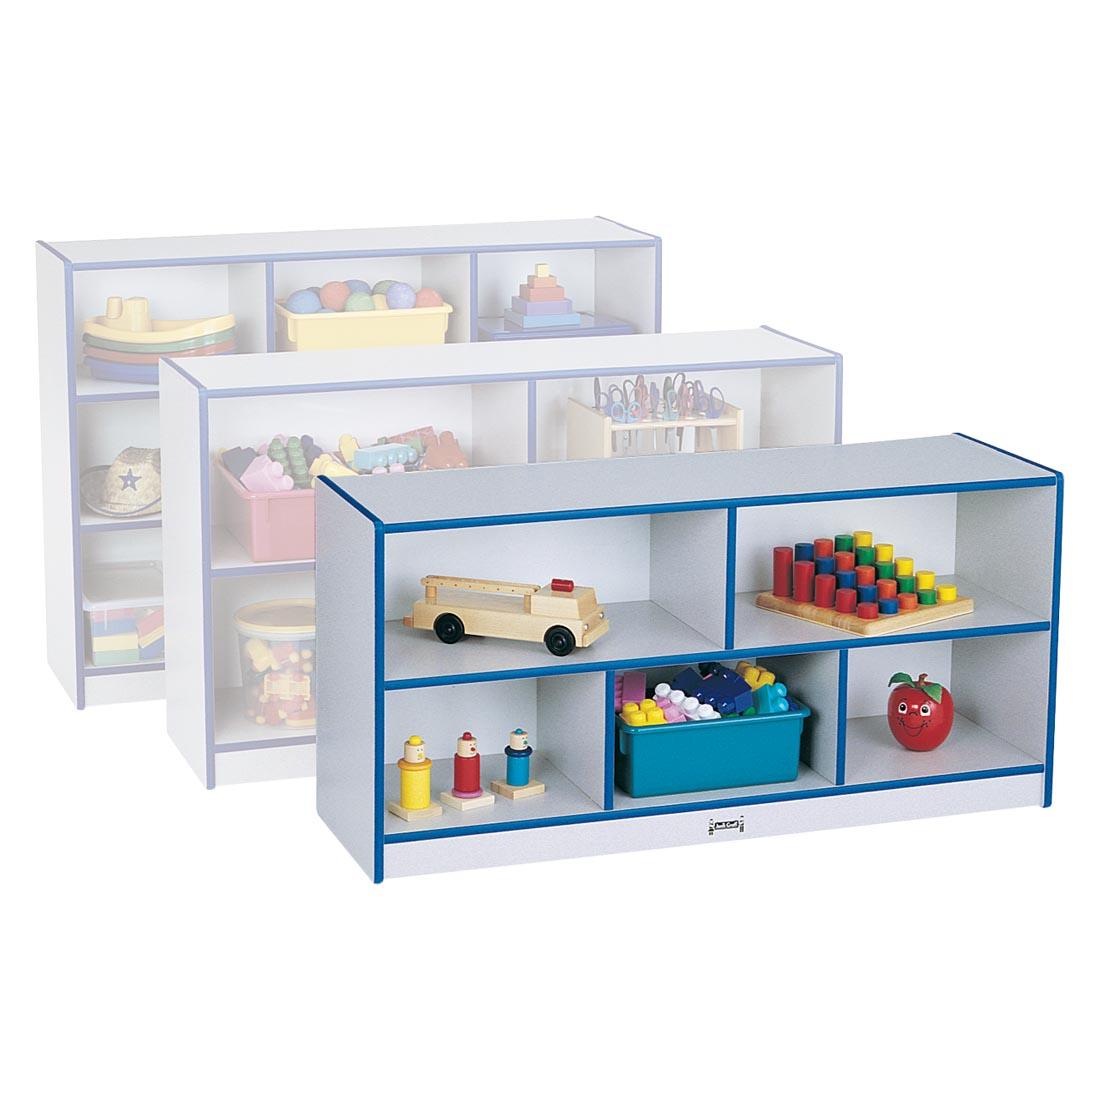 Blue Edge Rainbow Accents Single Mobile Storage Unit Toddler Height with two other shelves shown behind for scale; suggested storage contents also shown